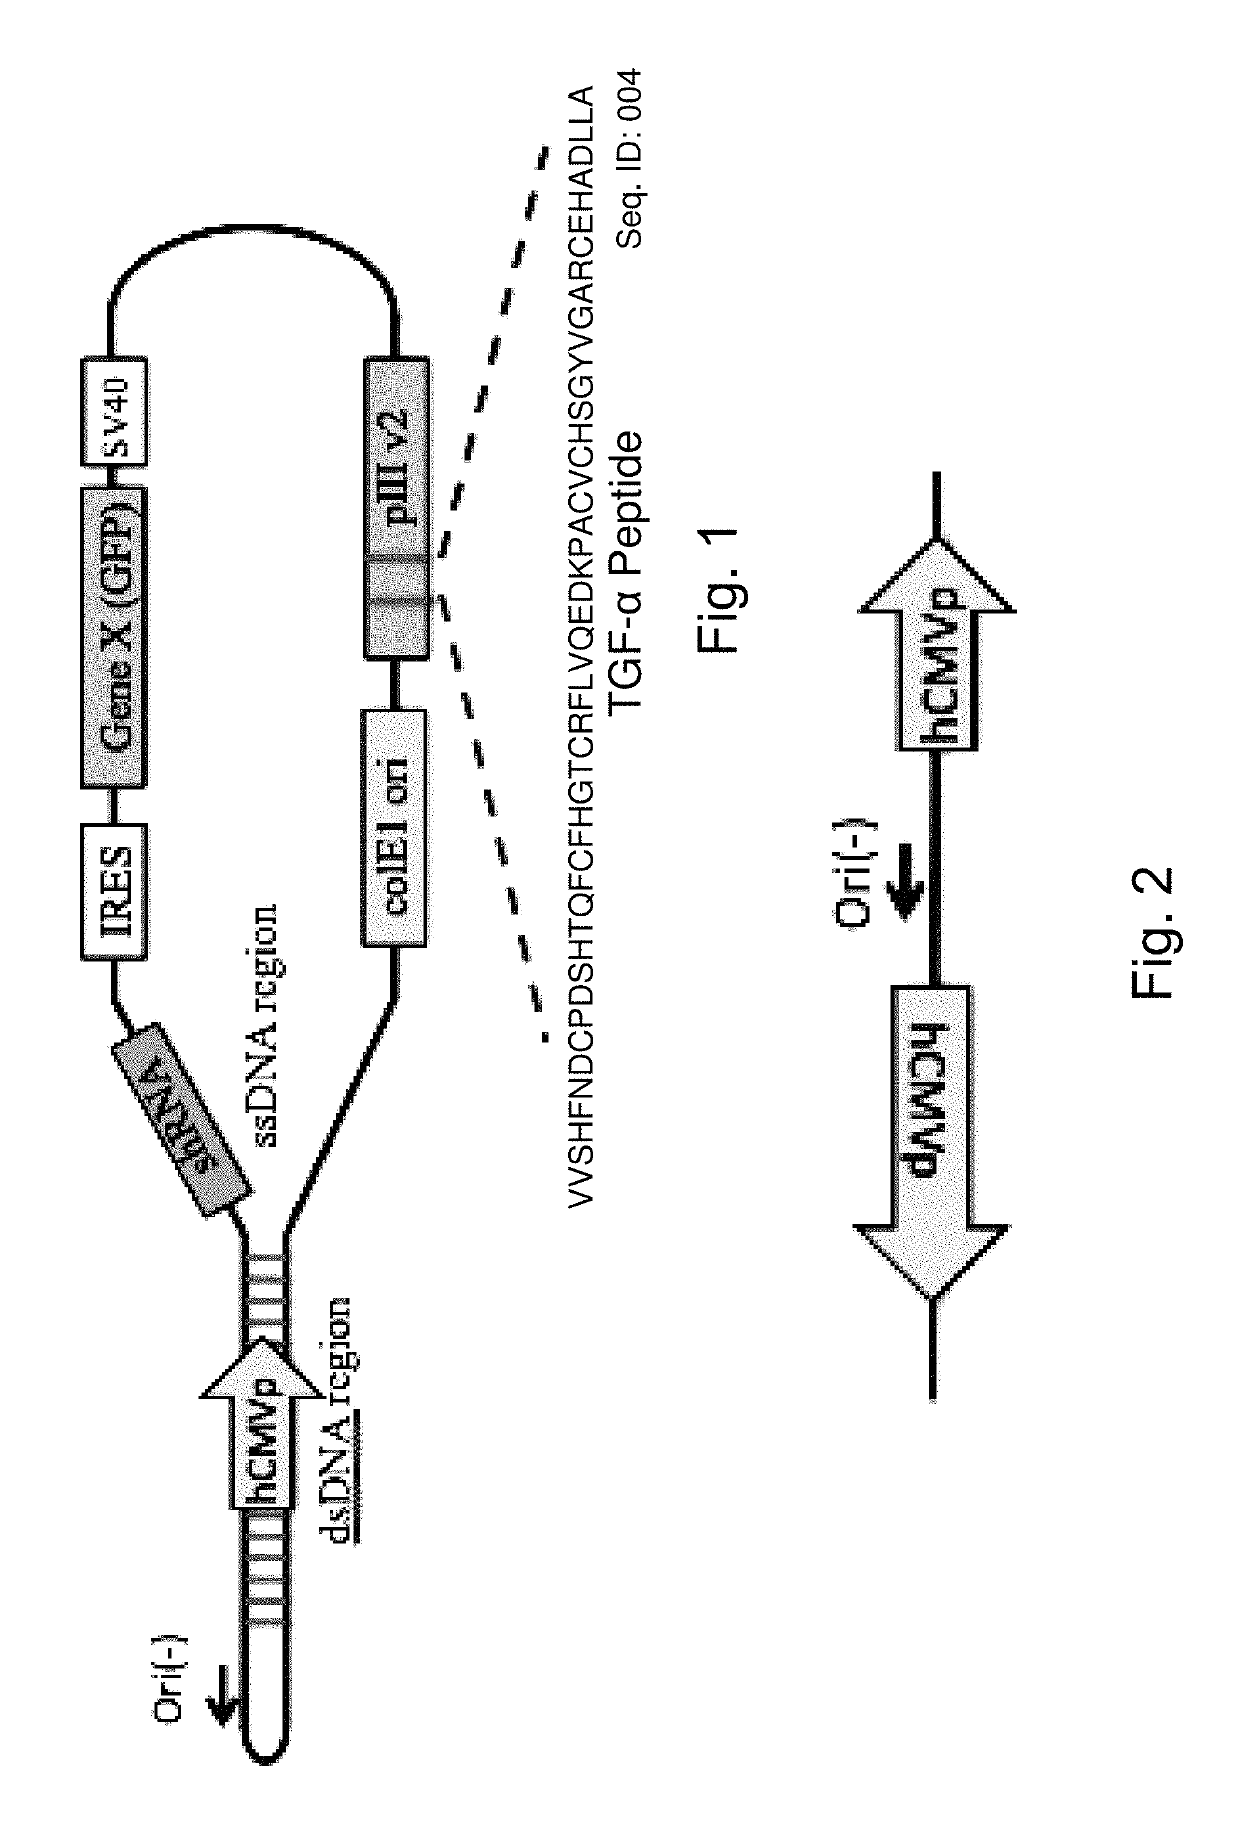 Bacteria carrying bacteriophage and protease inhibitors for the treatment of disorders and methods of treatment